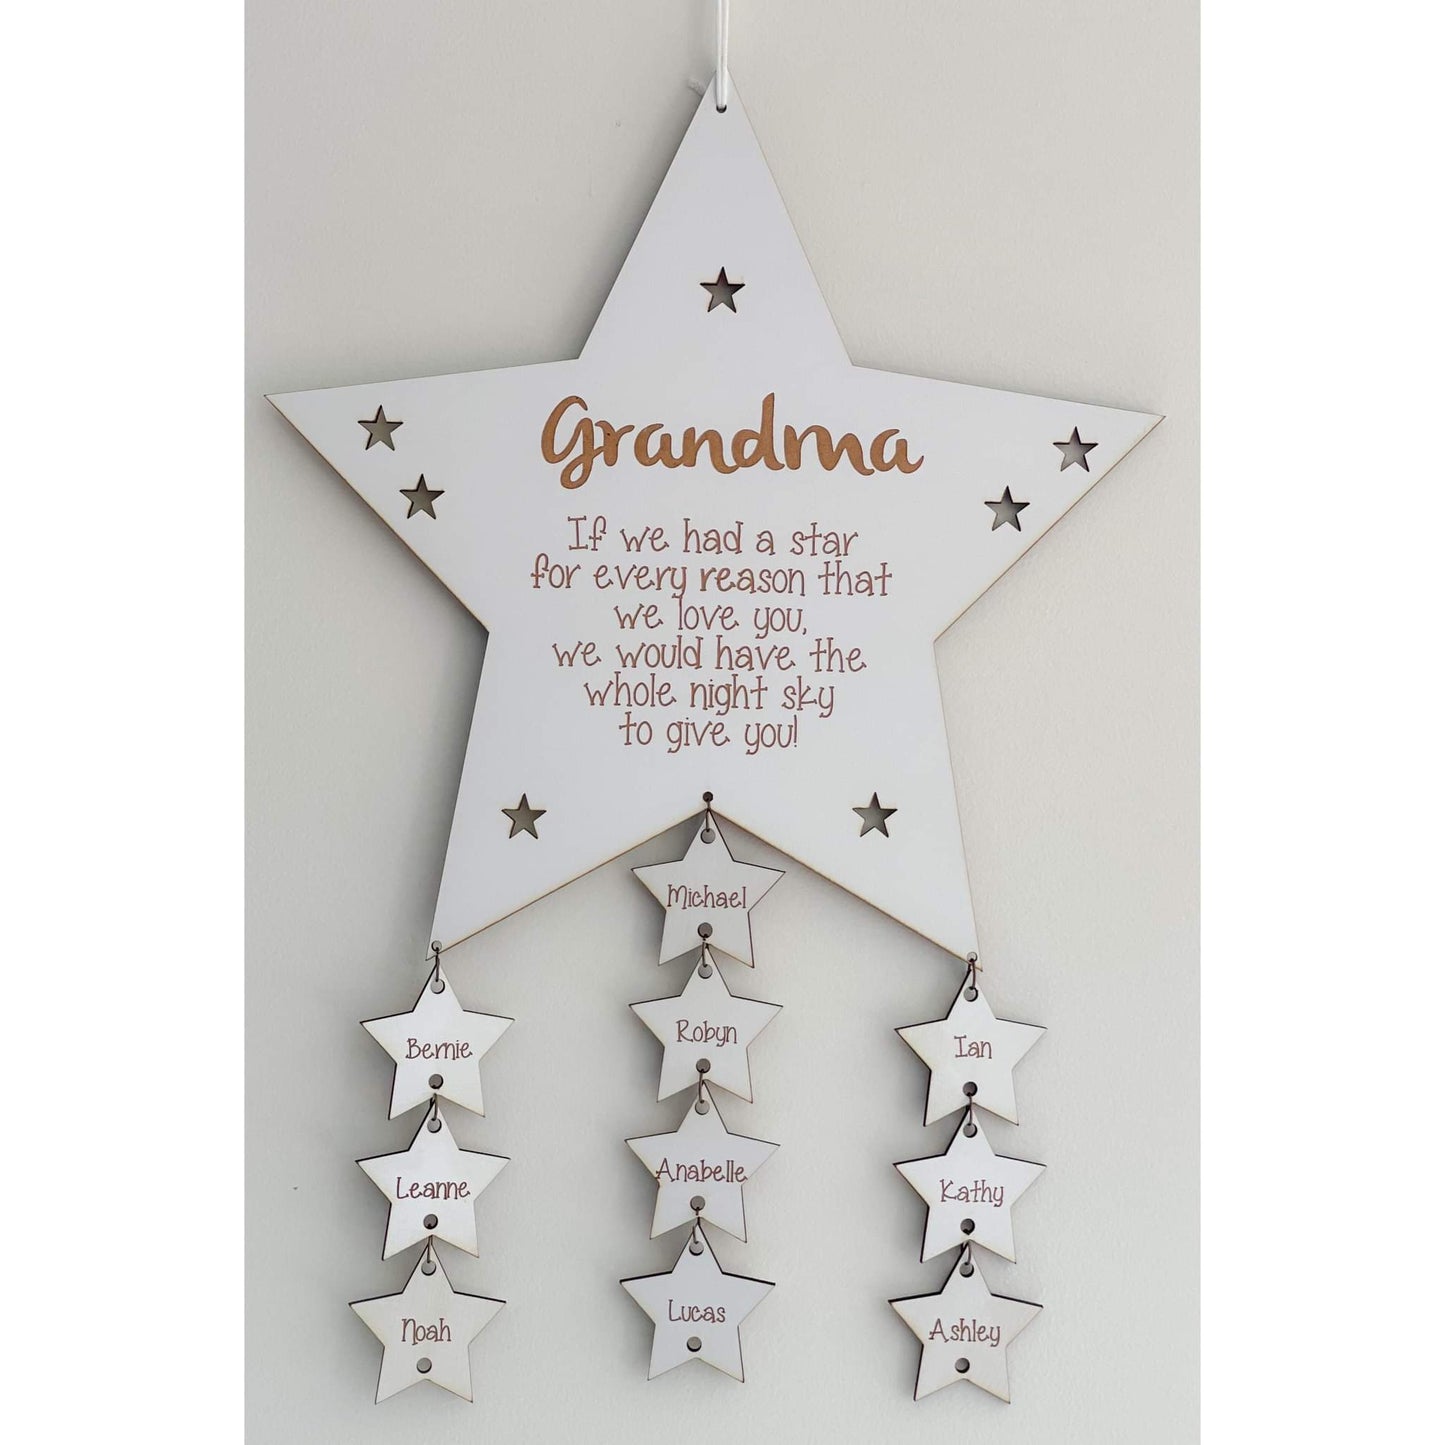 If we had a star wall hanger